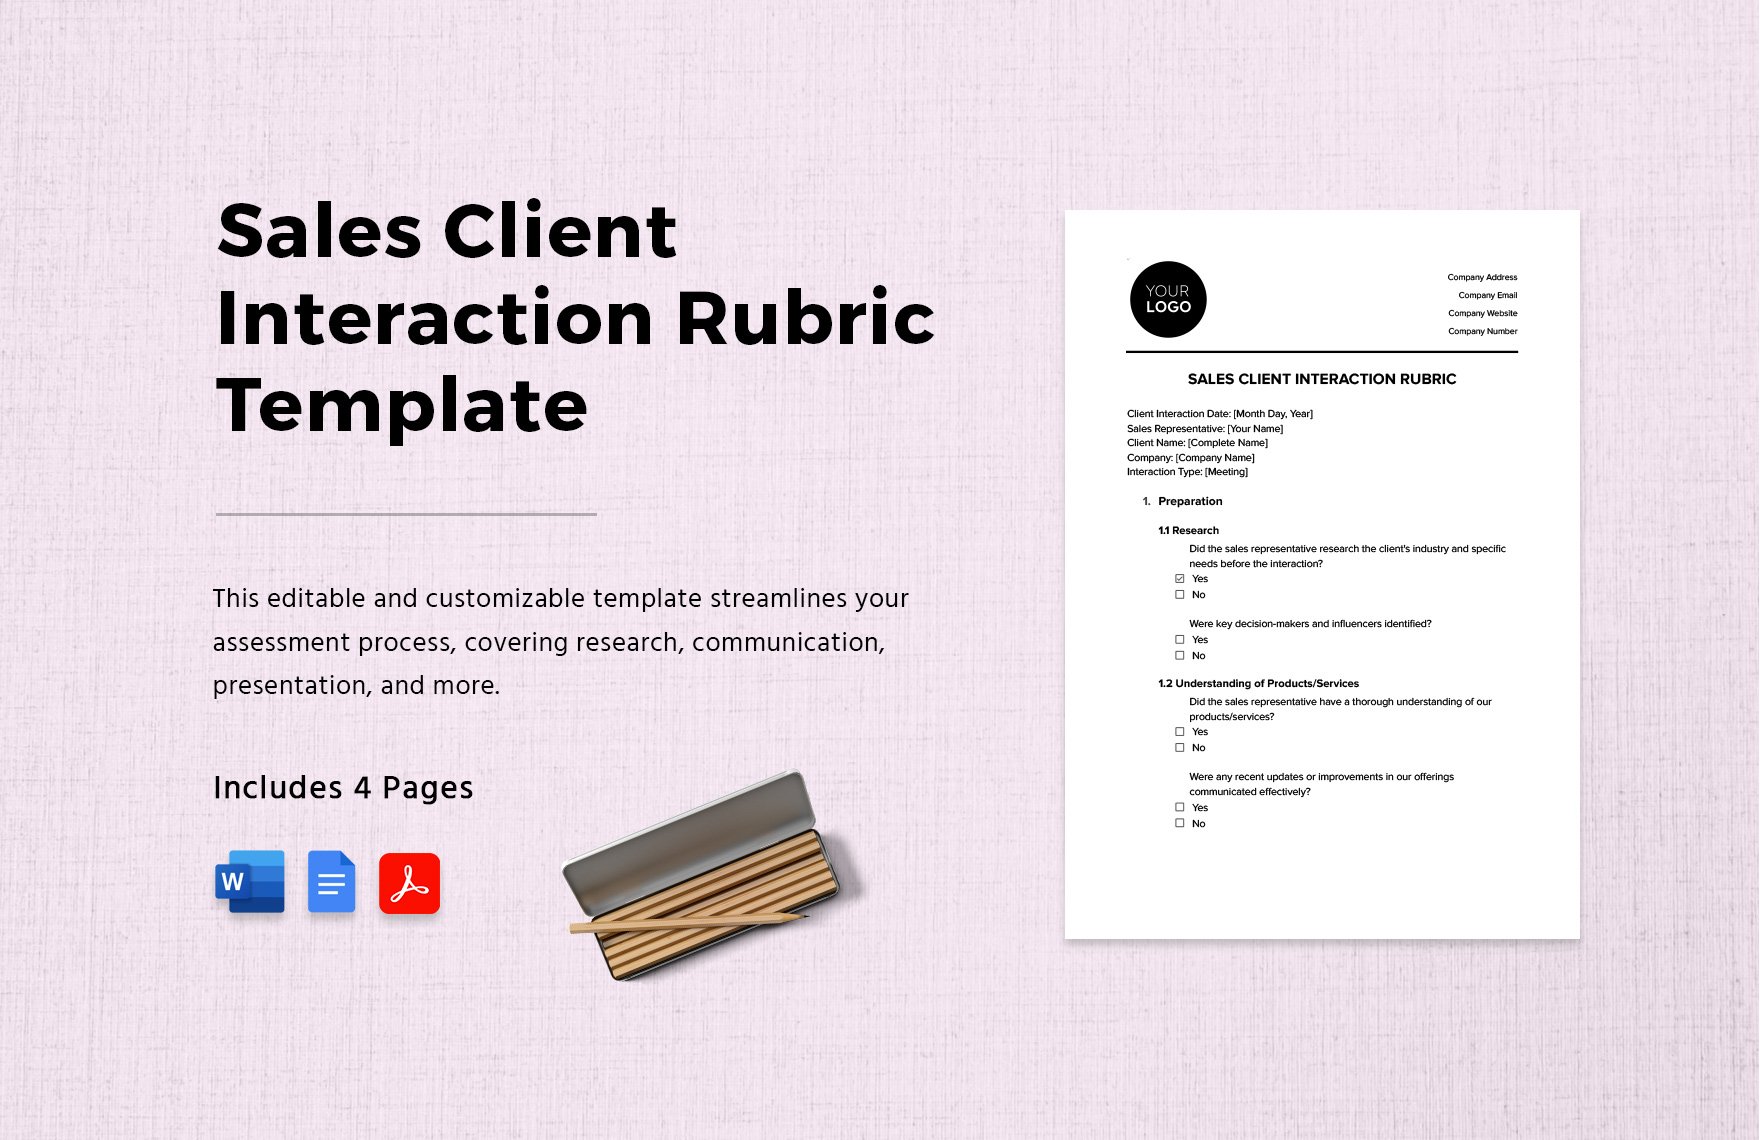 Sales Client Interaction Rubric Template